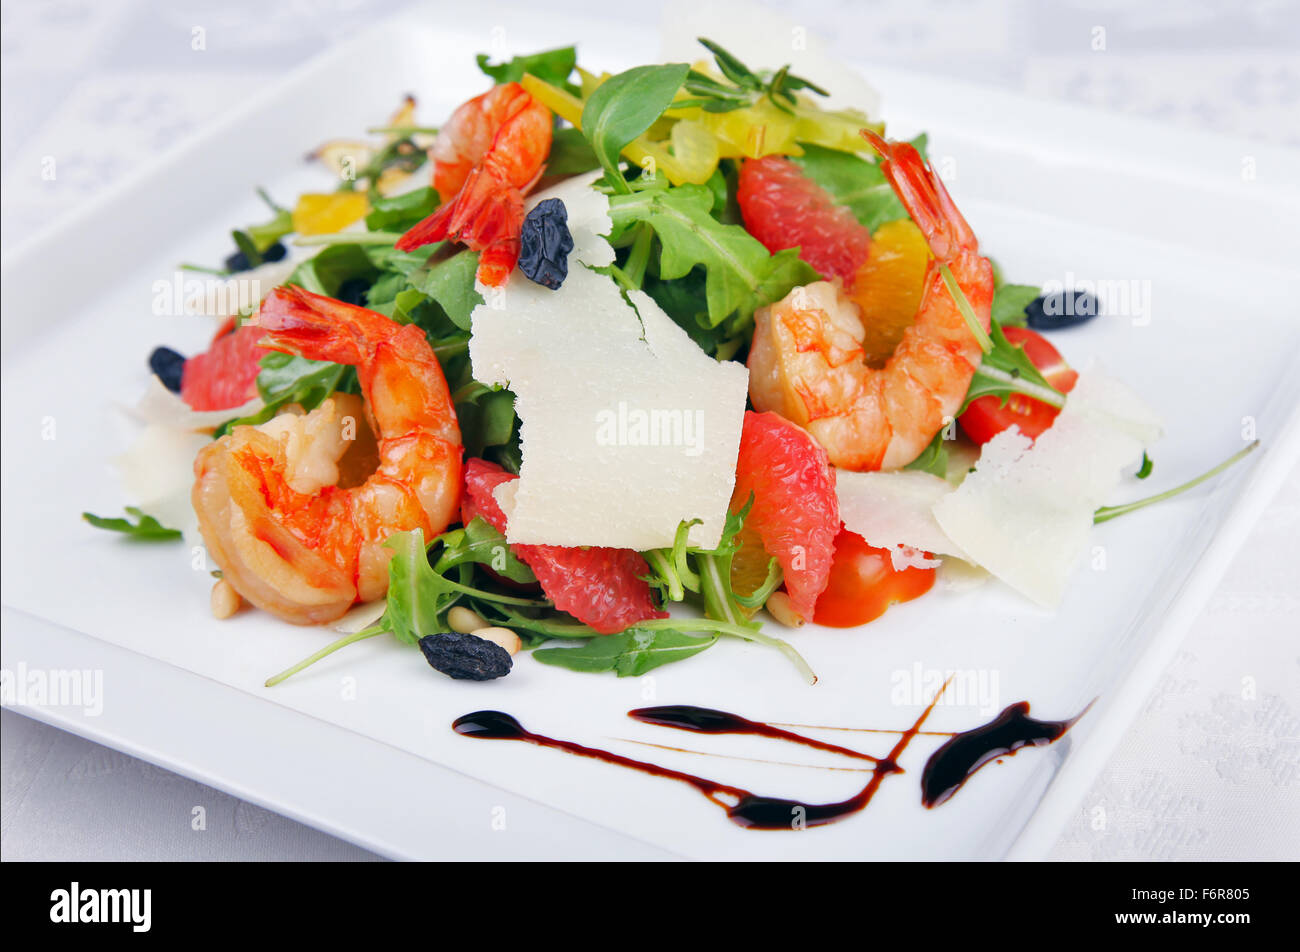 Big shrimp and green salad with cheese on plate Stock Photo